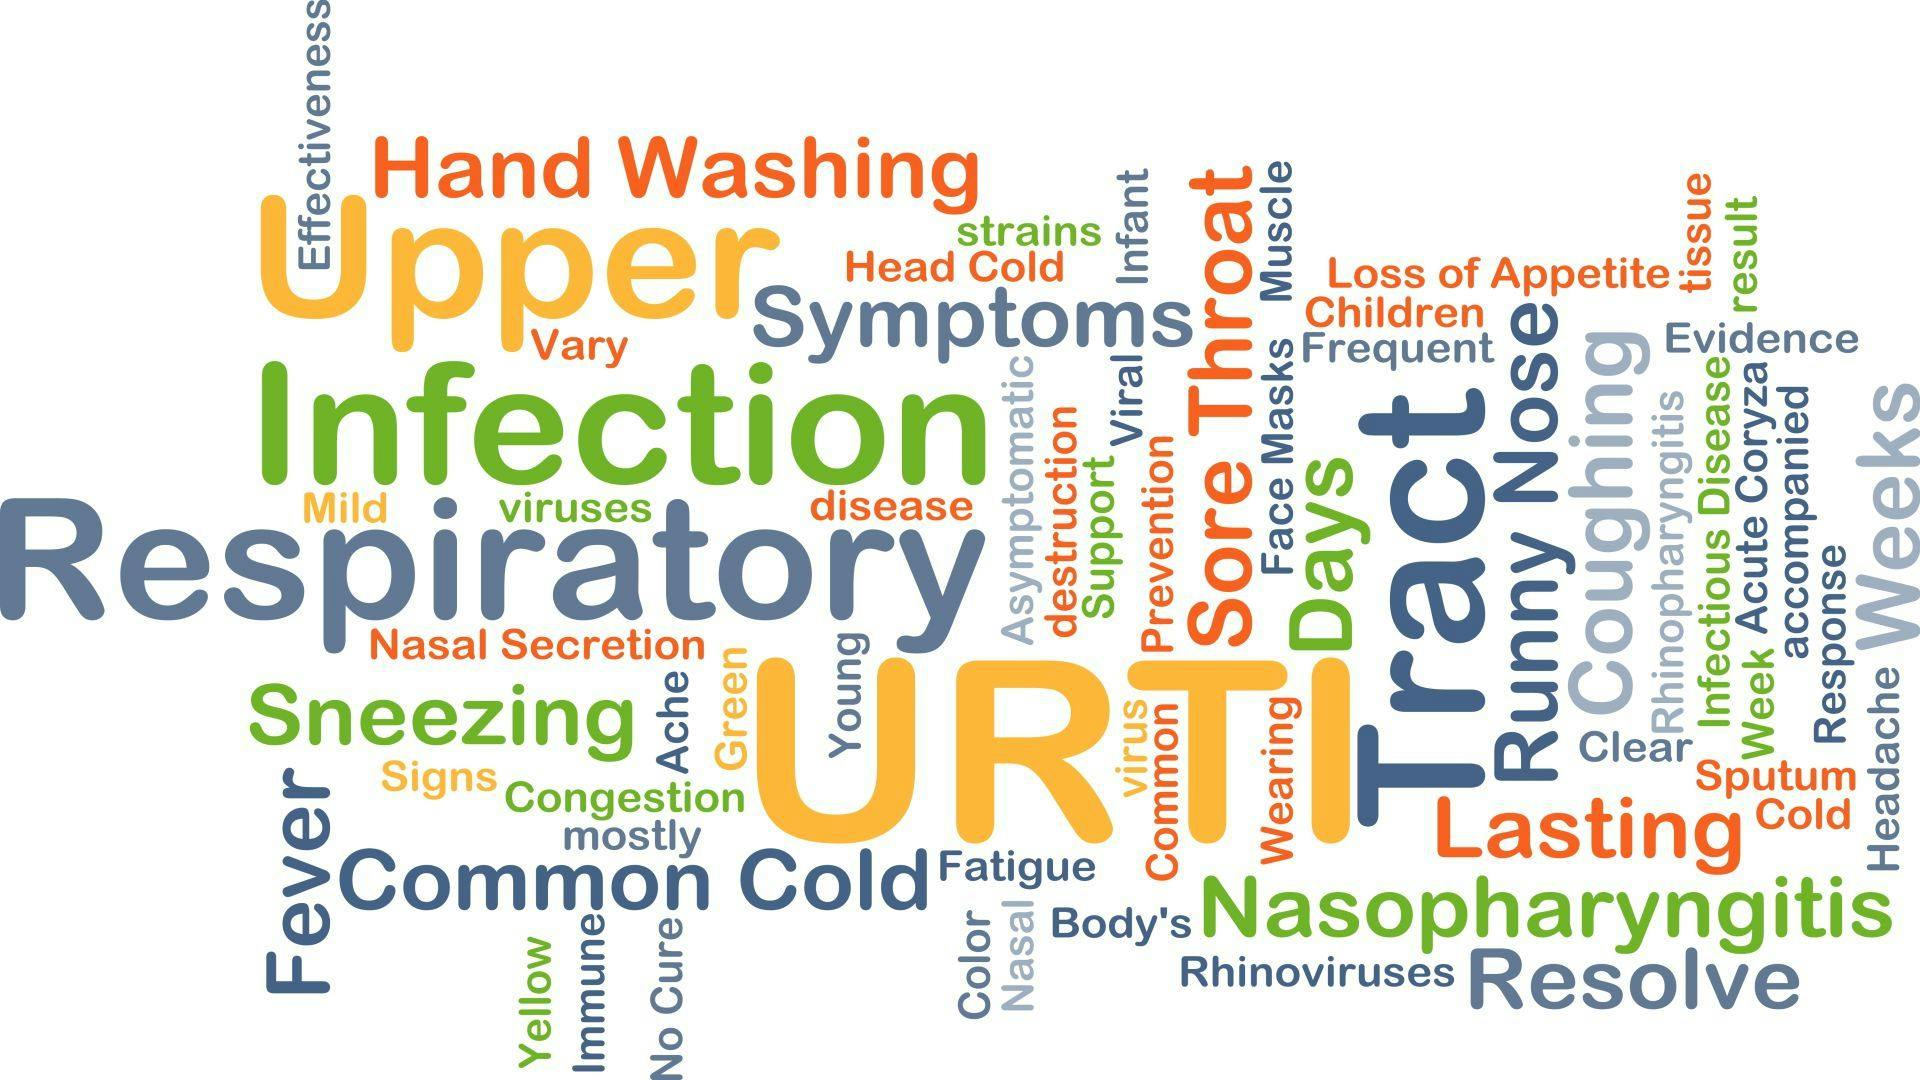 Viral and Bacterial Upper Respiratory Tract Infection in Hospital-Based Healthcare Workers